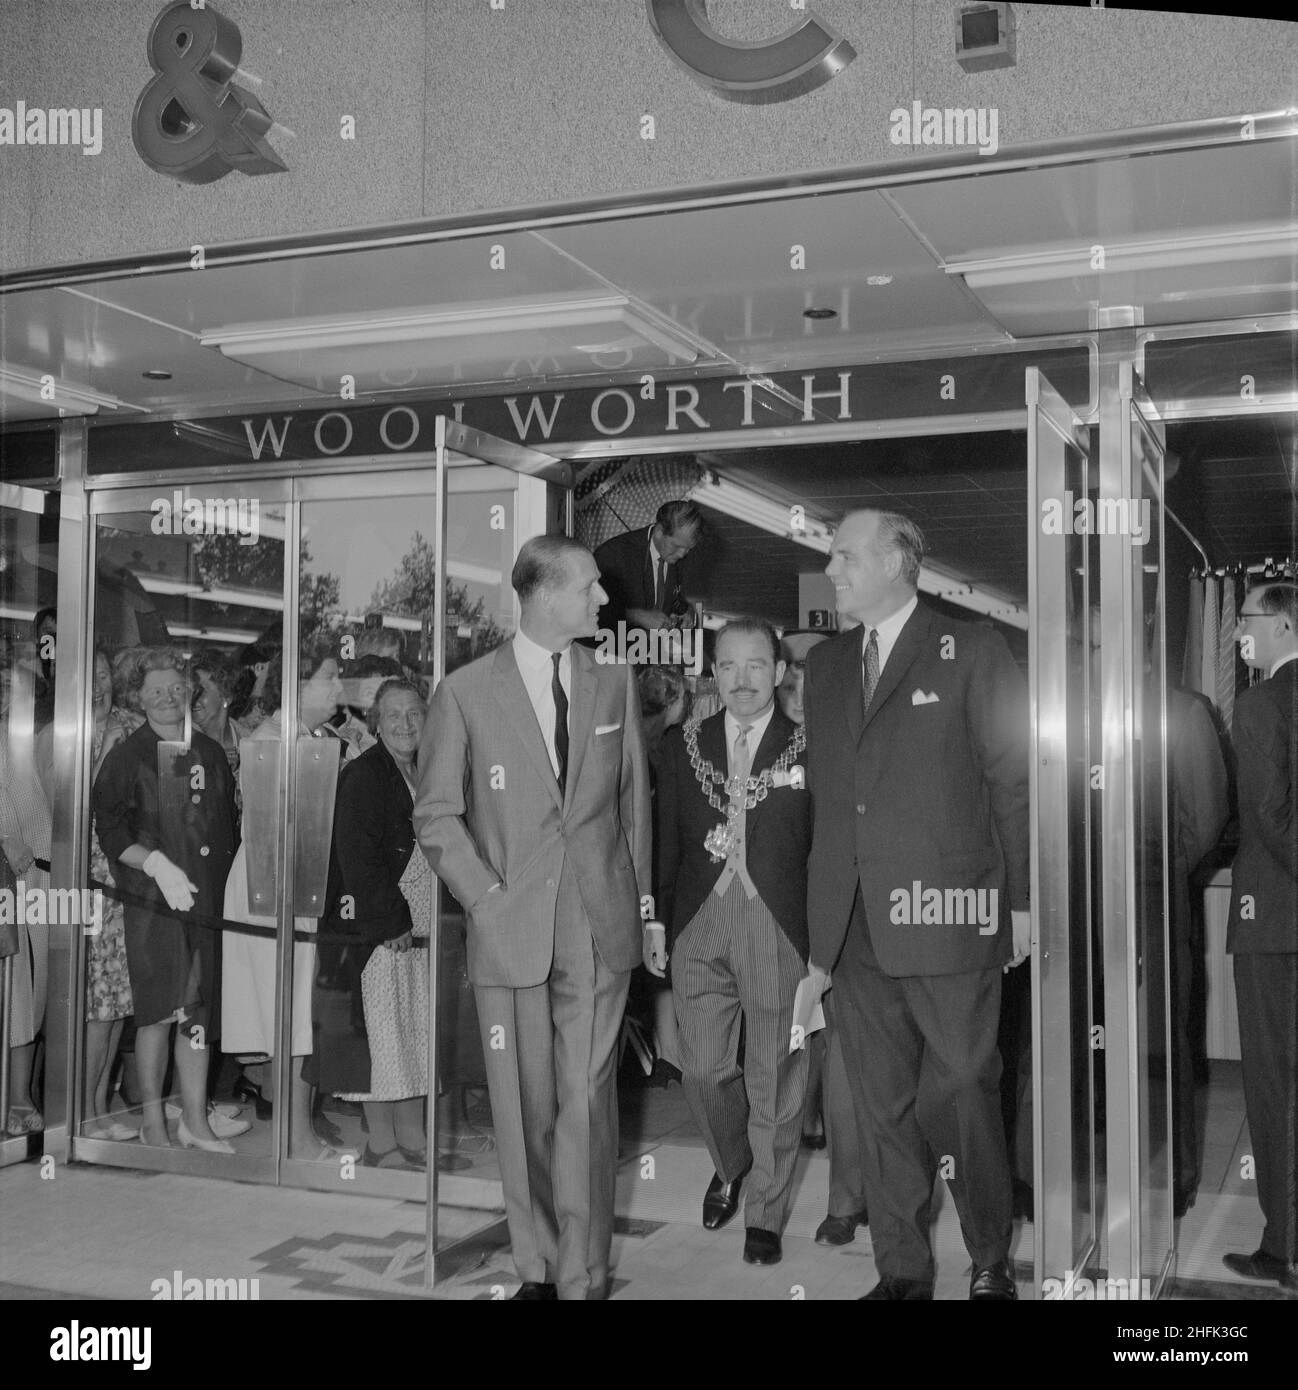 Bull Ring Centre, Birmingham, 29/05/1964. HRH Prince Philip exiting the new Woolworth's store at the Bull Ring Centre on the day of the opening ceremony. On 29th May 1964, His Royal Highness Prince Philip, Duke of Edinburgh, opened the Bull Ring Centre. The Duke toured the site, meeting various people along the way and unveiling a commemorative plaque in the Centre Court. A formal lunch was then held in his honour at the Mecca Banqueting Hall; part of the new Bull Ring development. Approximately 400 guests attended including the Lord Mayor of Birmingham; Alderman F Price (seen in this image), Stock Photo